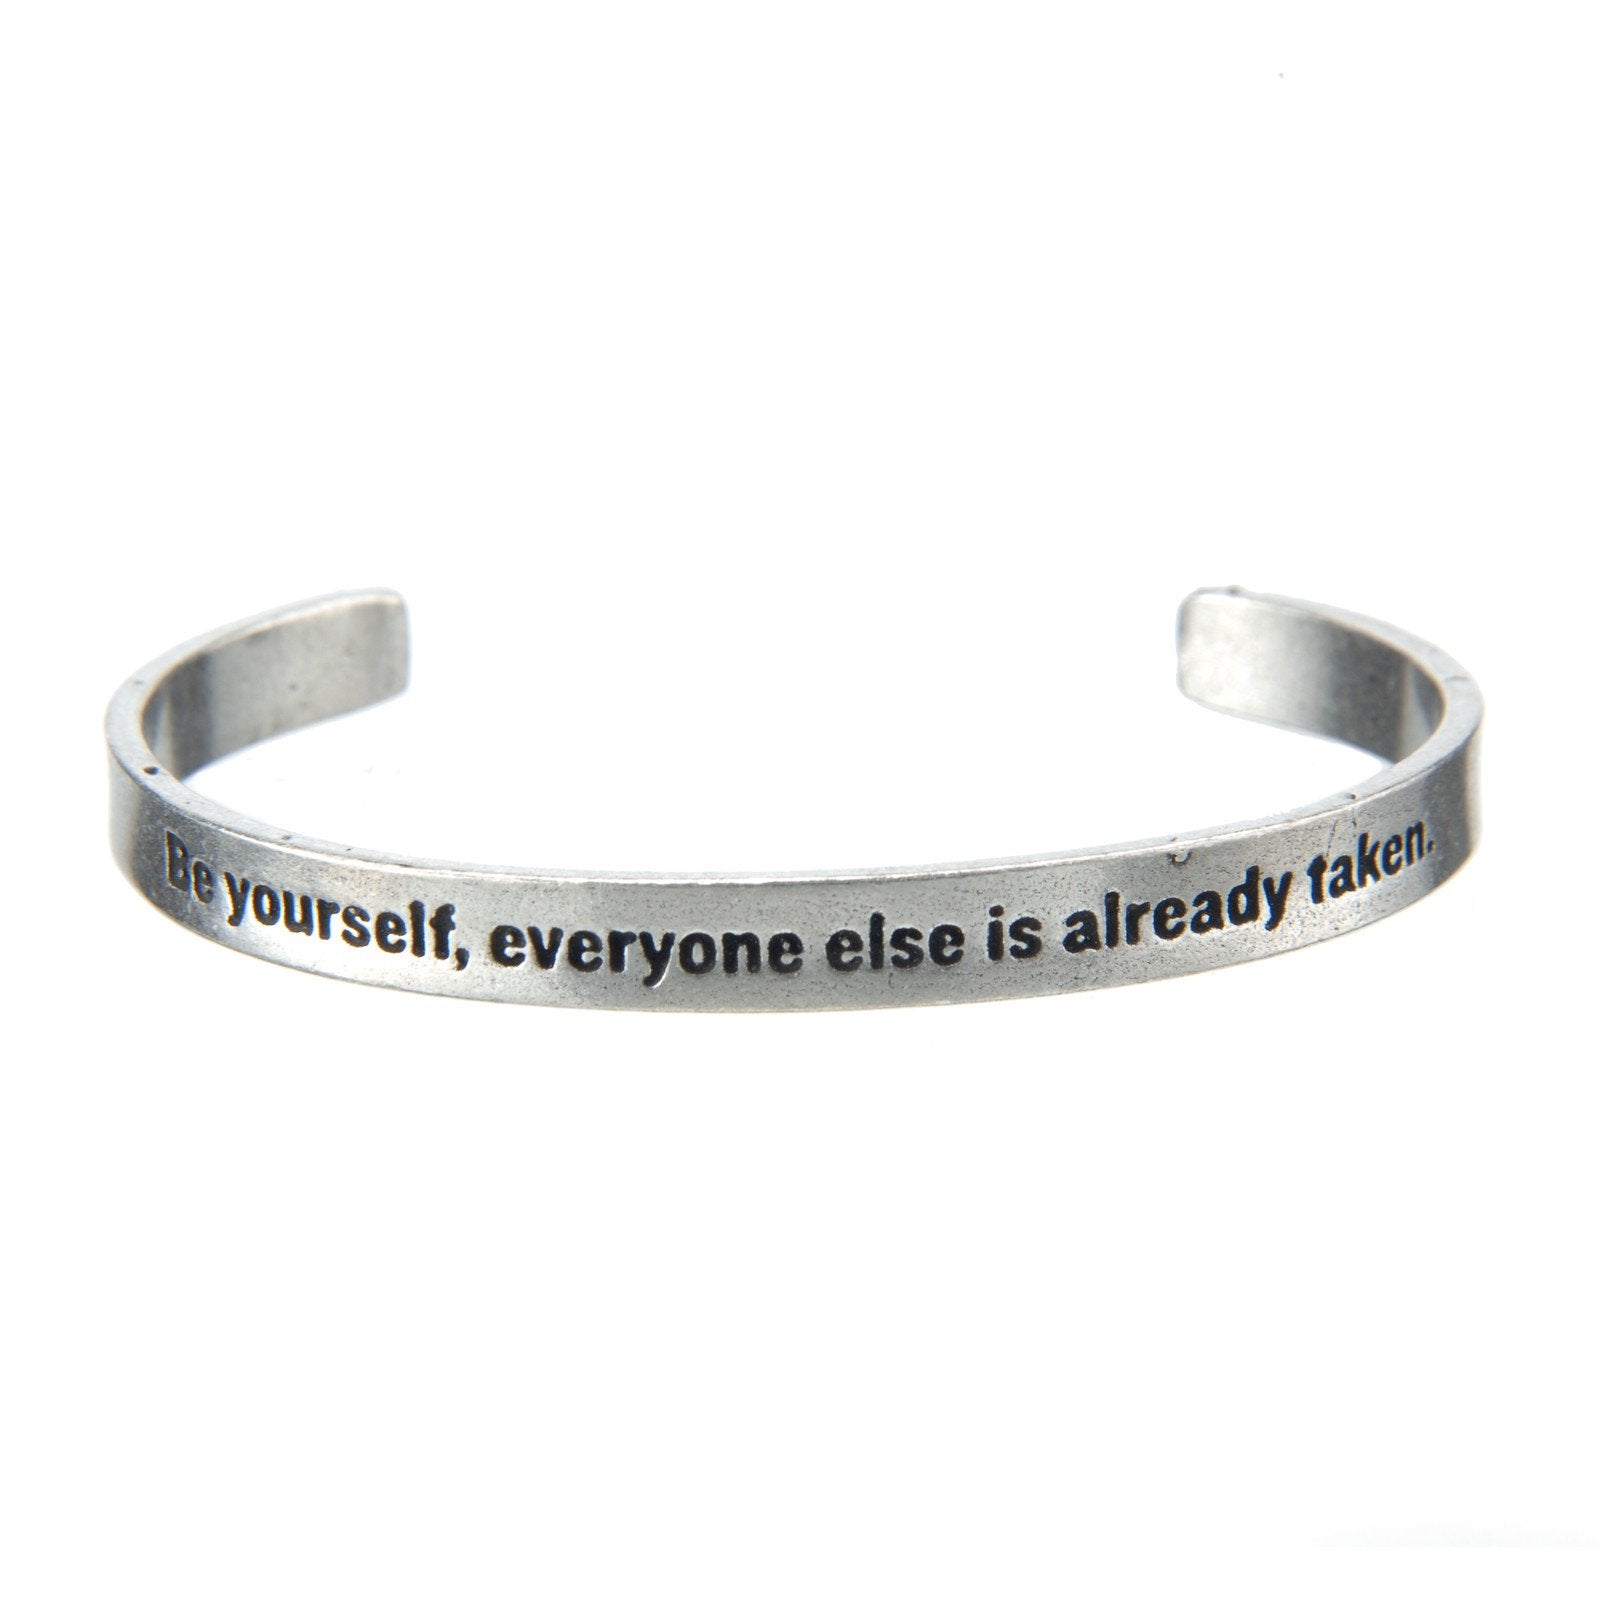 Be Yourself, Everyone Else is Already Taken Quotable Cuff Bracelet front